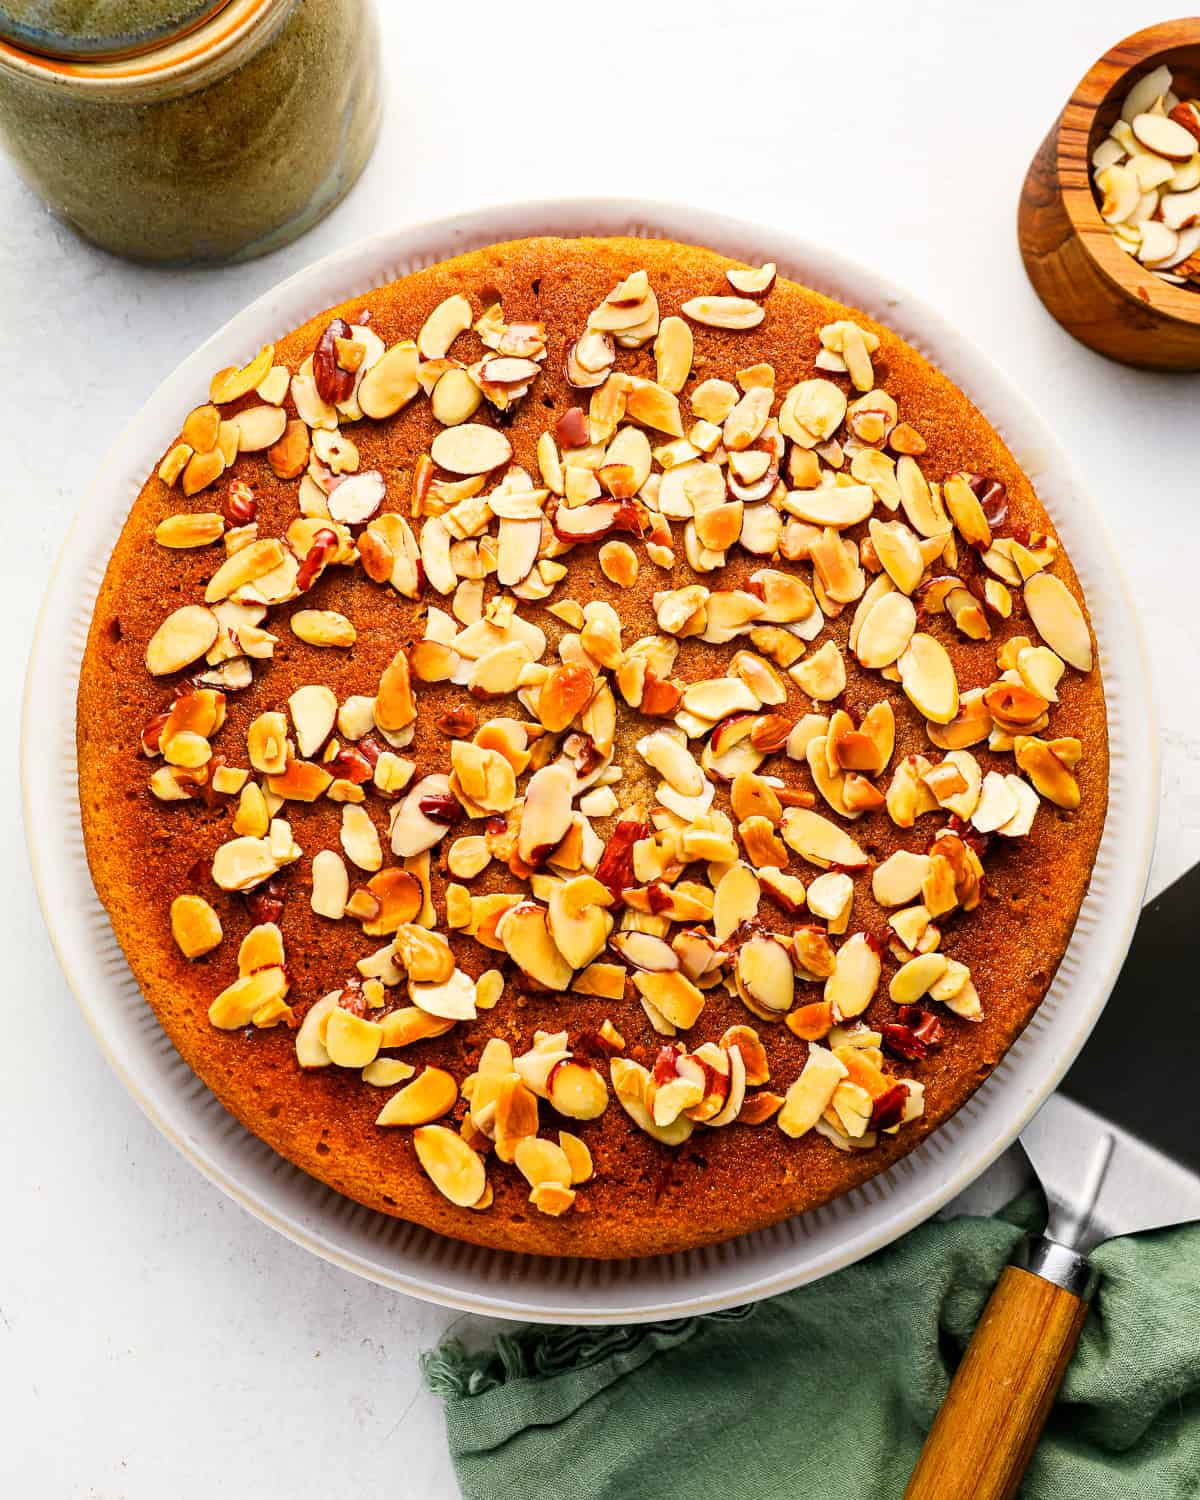 A whole honey cake topped with almonds.